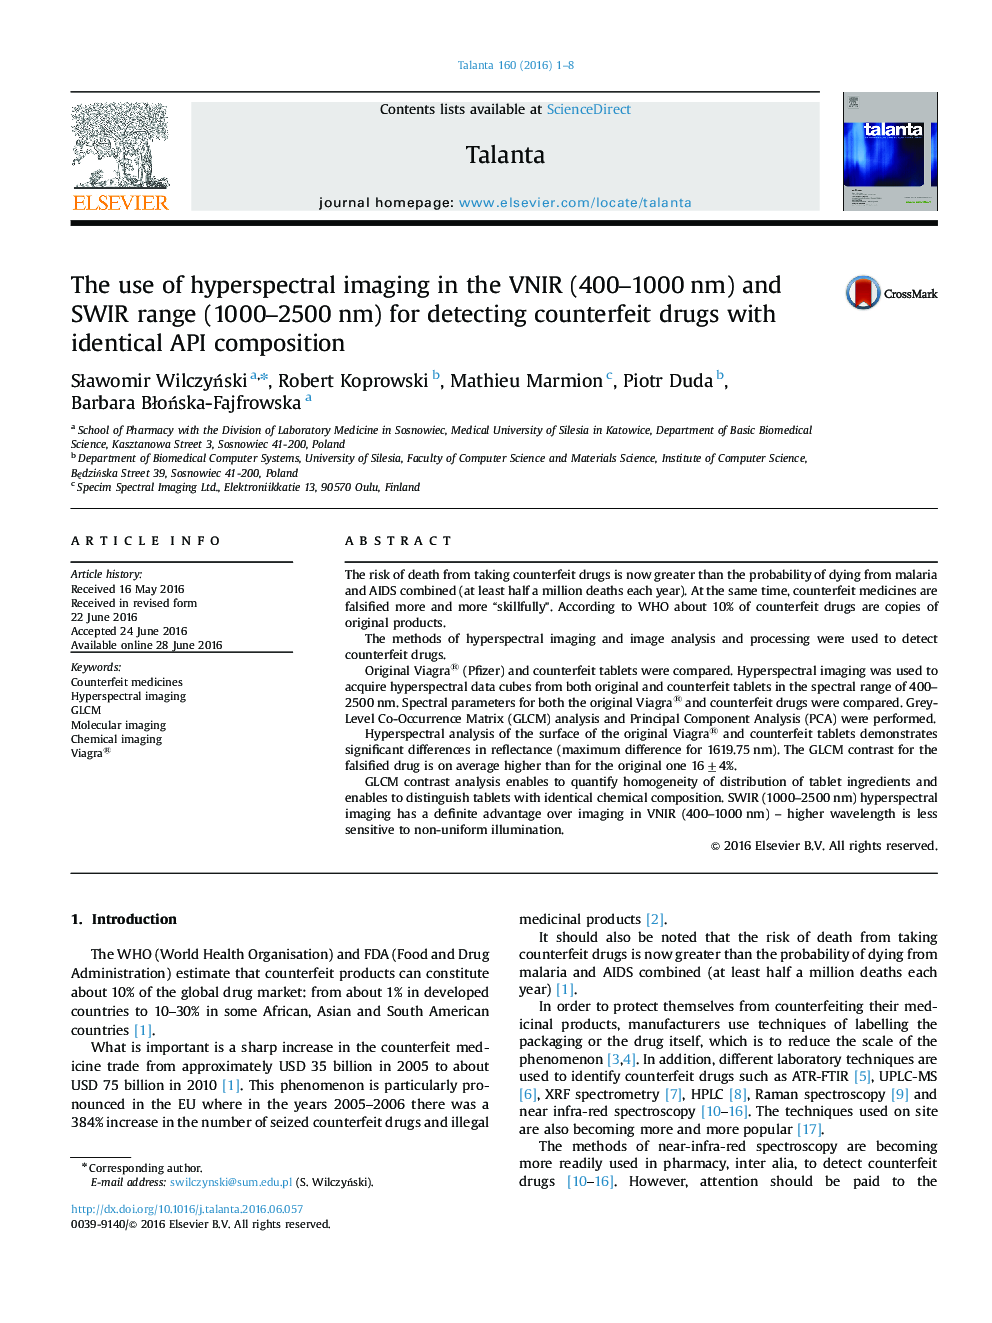 The use of hyperspectral imaging in the VNIR (400–1000 nm) and SWIR range (1000–2500 nm) for detecting counterfeit drugs with identical API composition